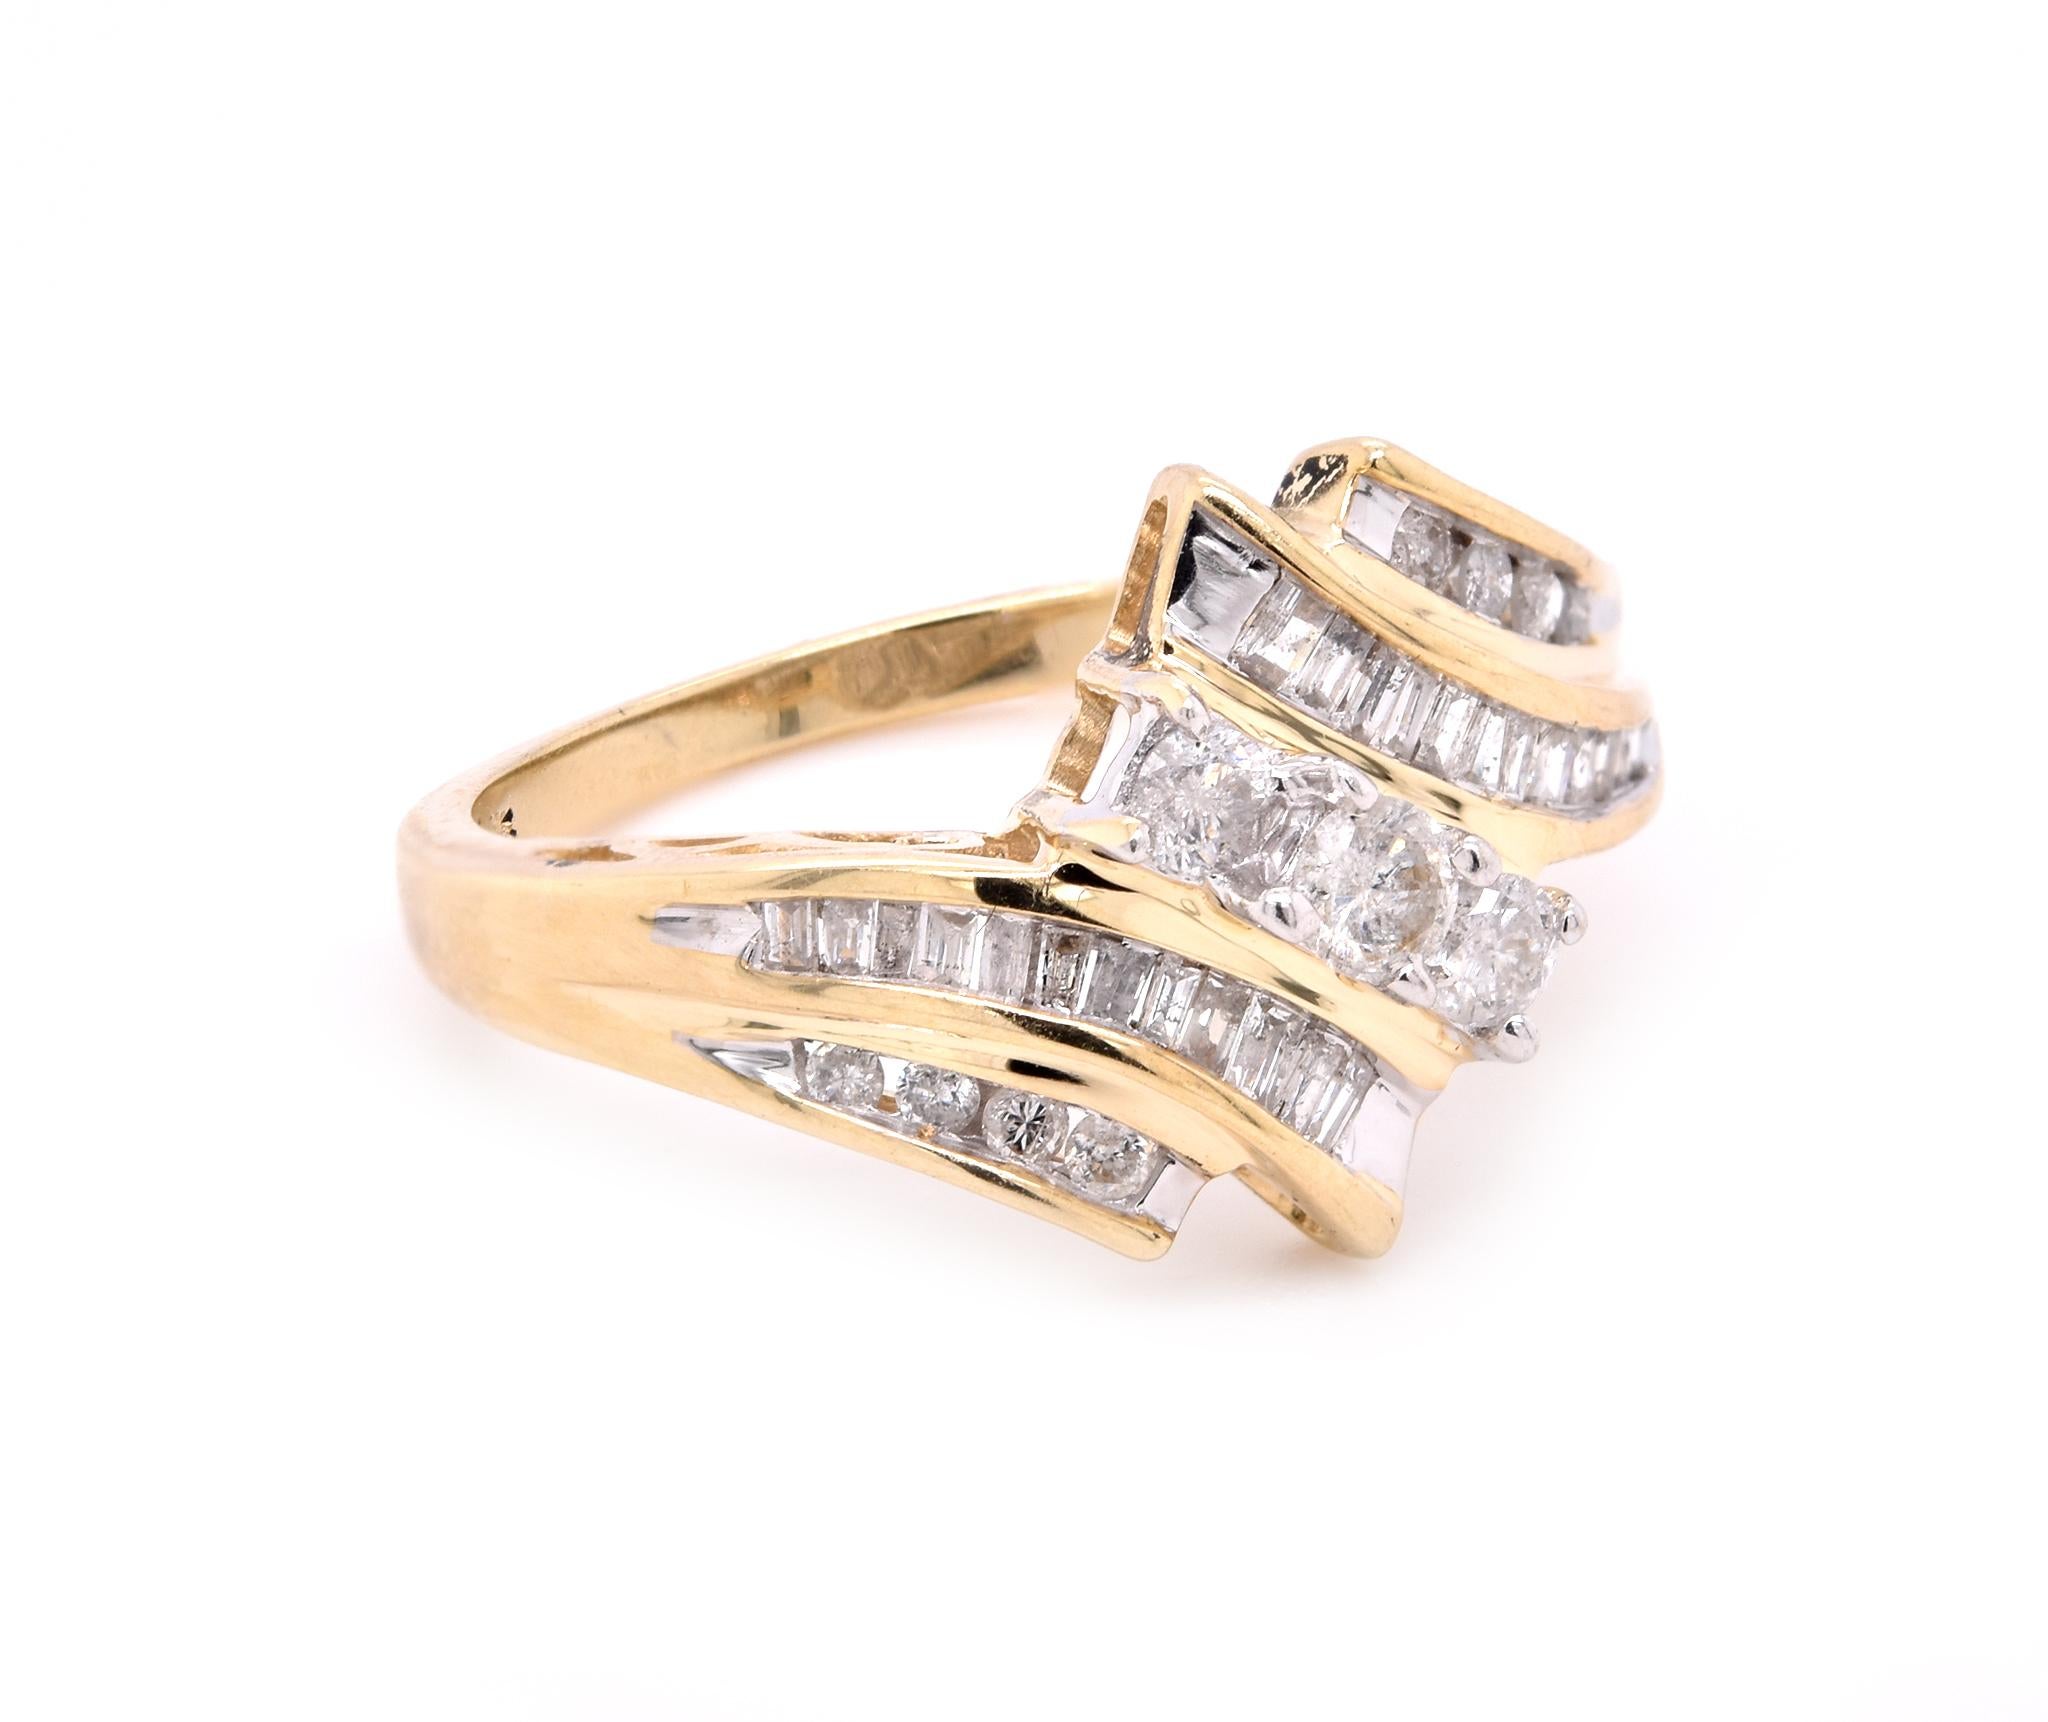 Designer: custom
Material: 10K yellow gold
Diamonds:  35 round & baguette cut = 1.00cttw
Color: H 
Clarity: SI2
Ring Size: 7 (Please allow up to two additional business days for sizing requests)
Dimensions: ring top measures 13.3mm wide
Weight: 2.98